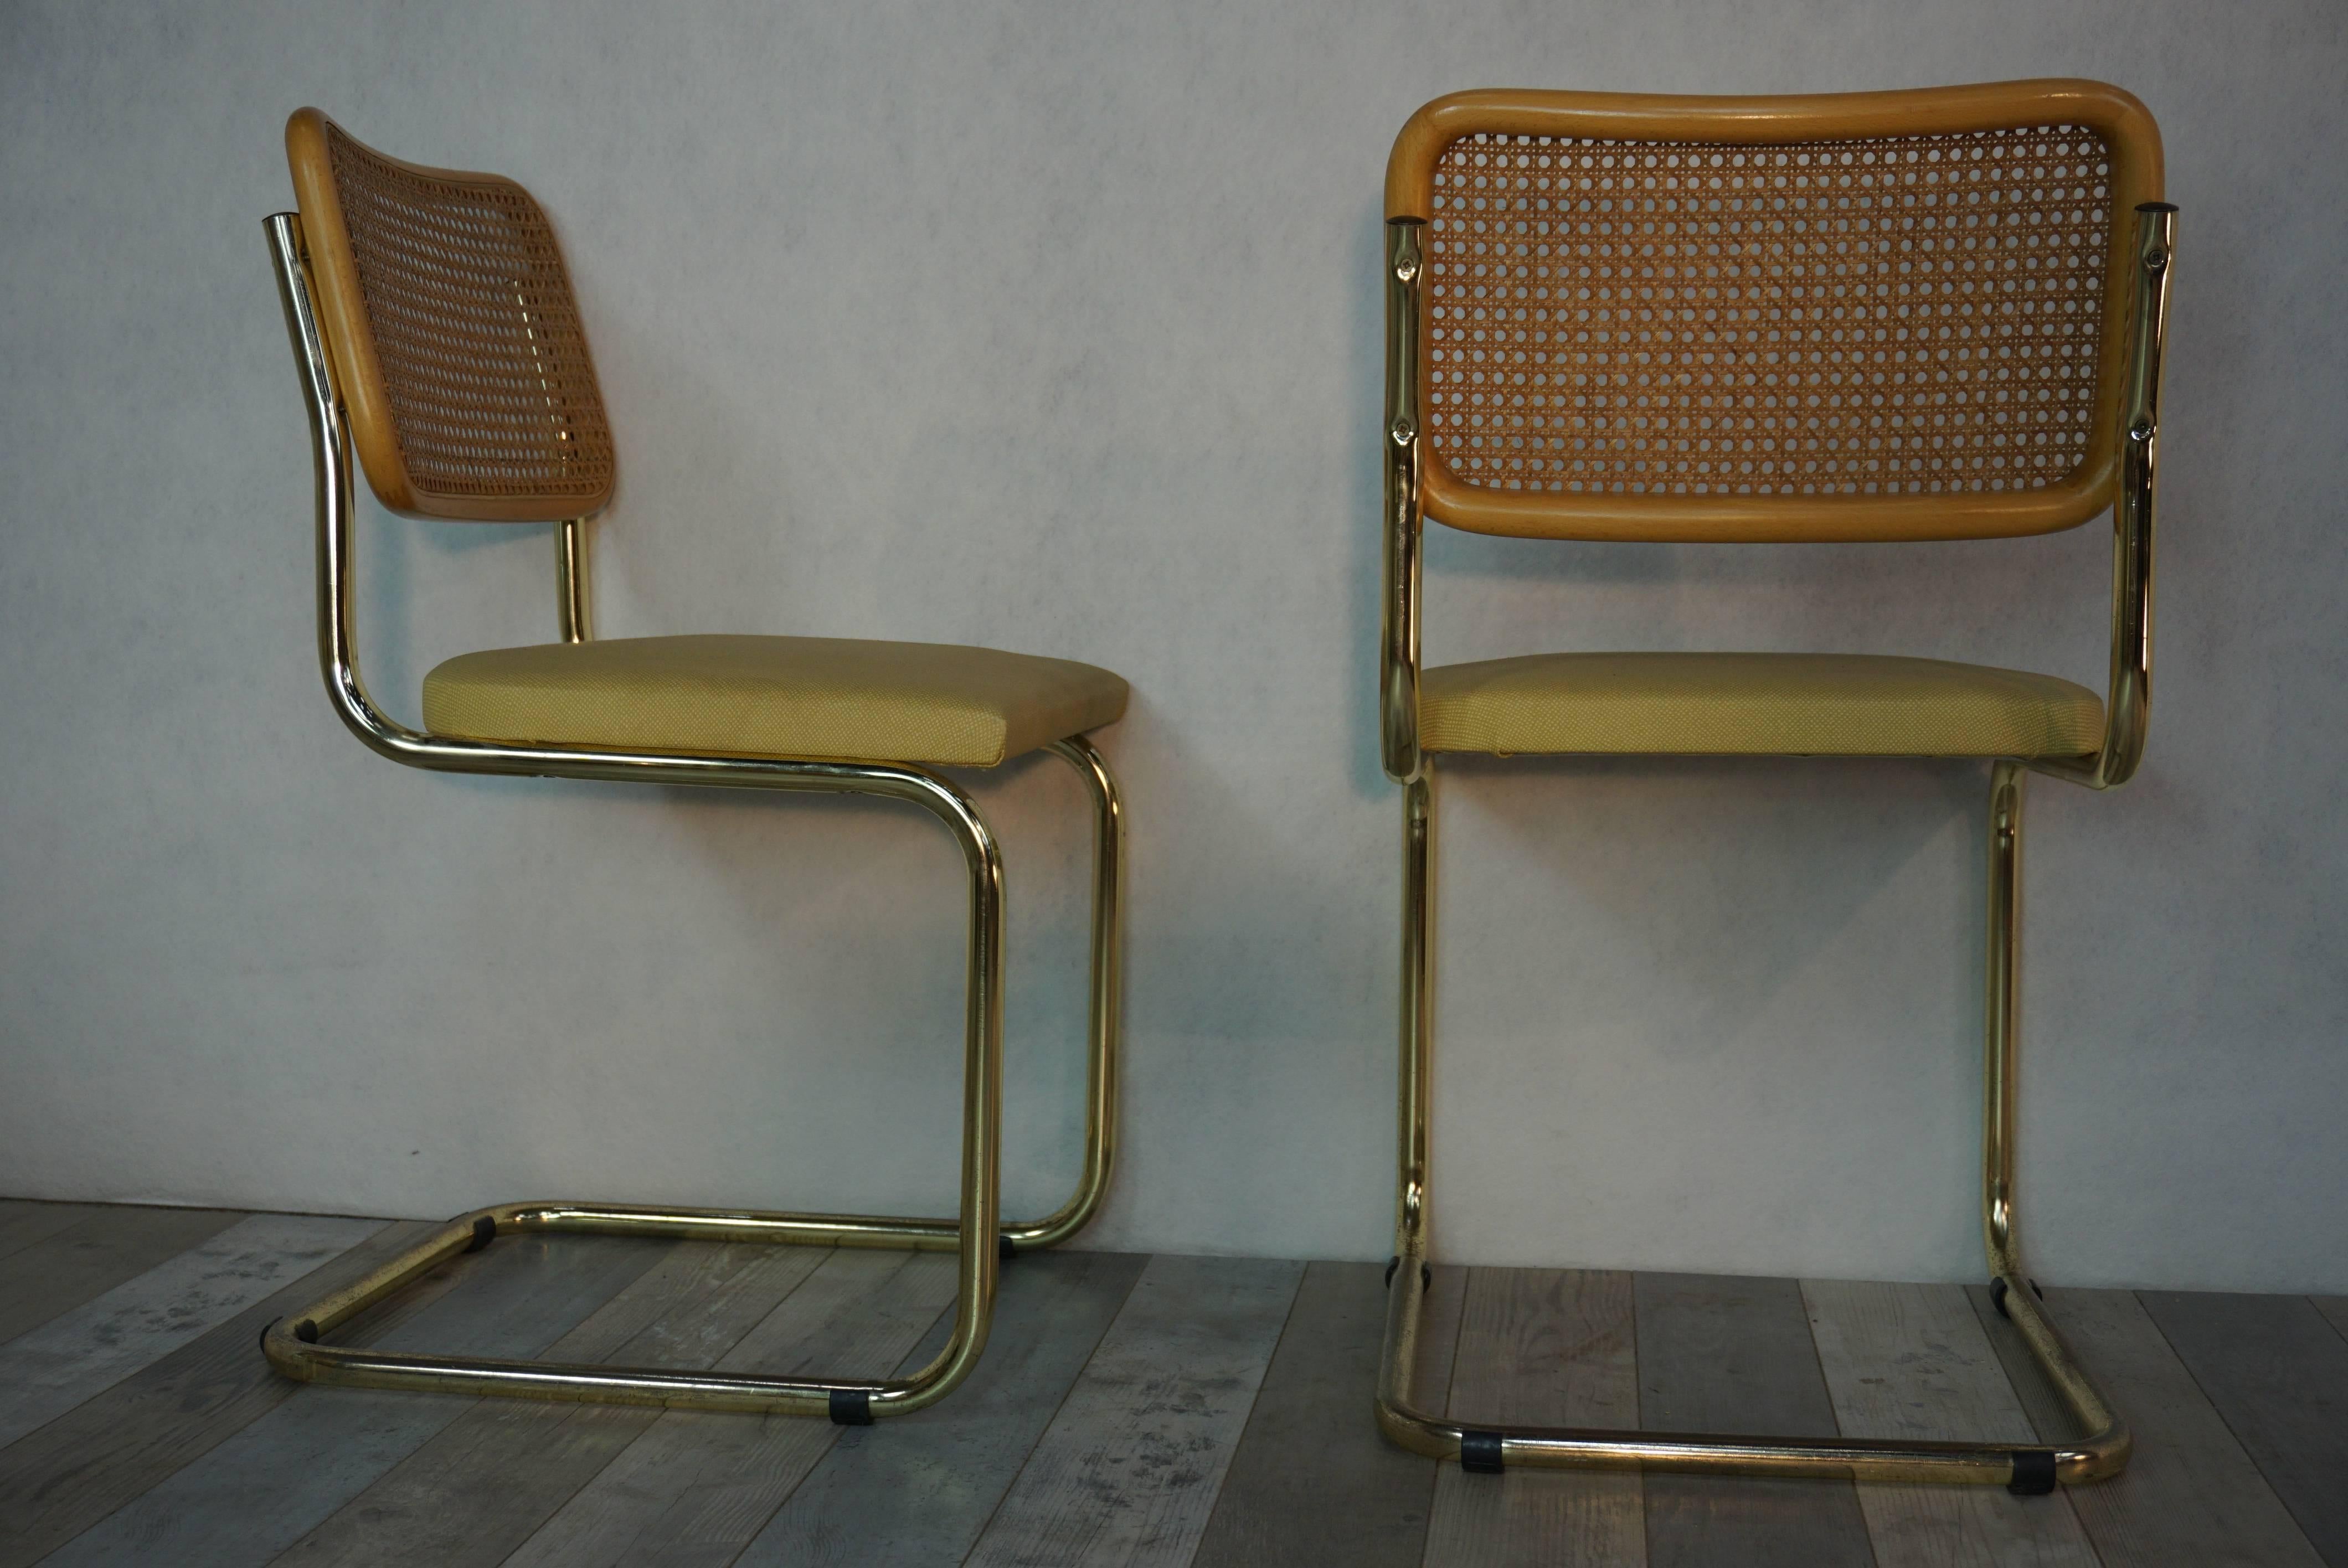 A must have of the Bauhaus, you are accustomed to see these chairs vintage, iconic, timeless and unavoidable, with chrome structure, back and wicker seat. Here opt for originality in addition with the alliance of wooden backrest and cane, a soft